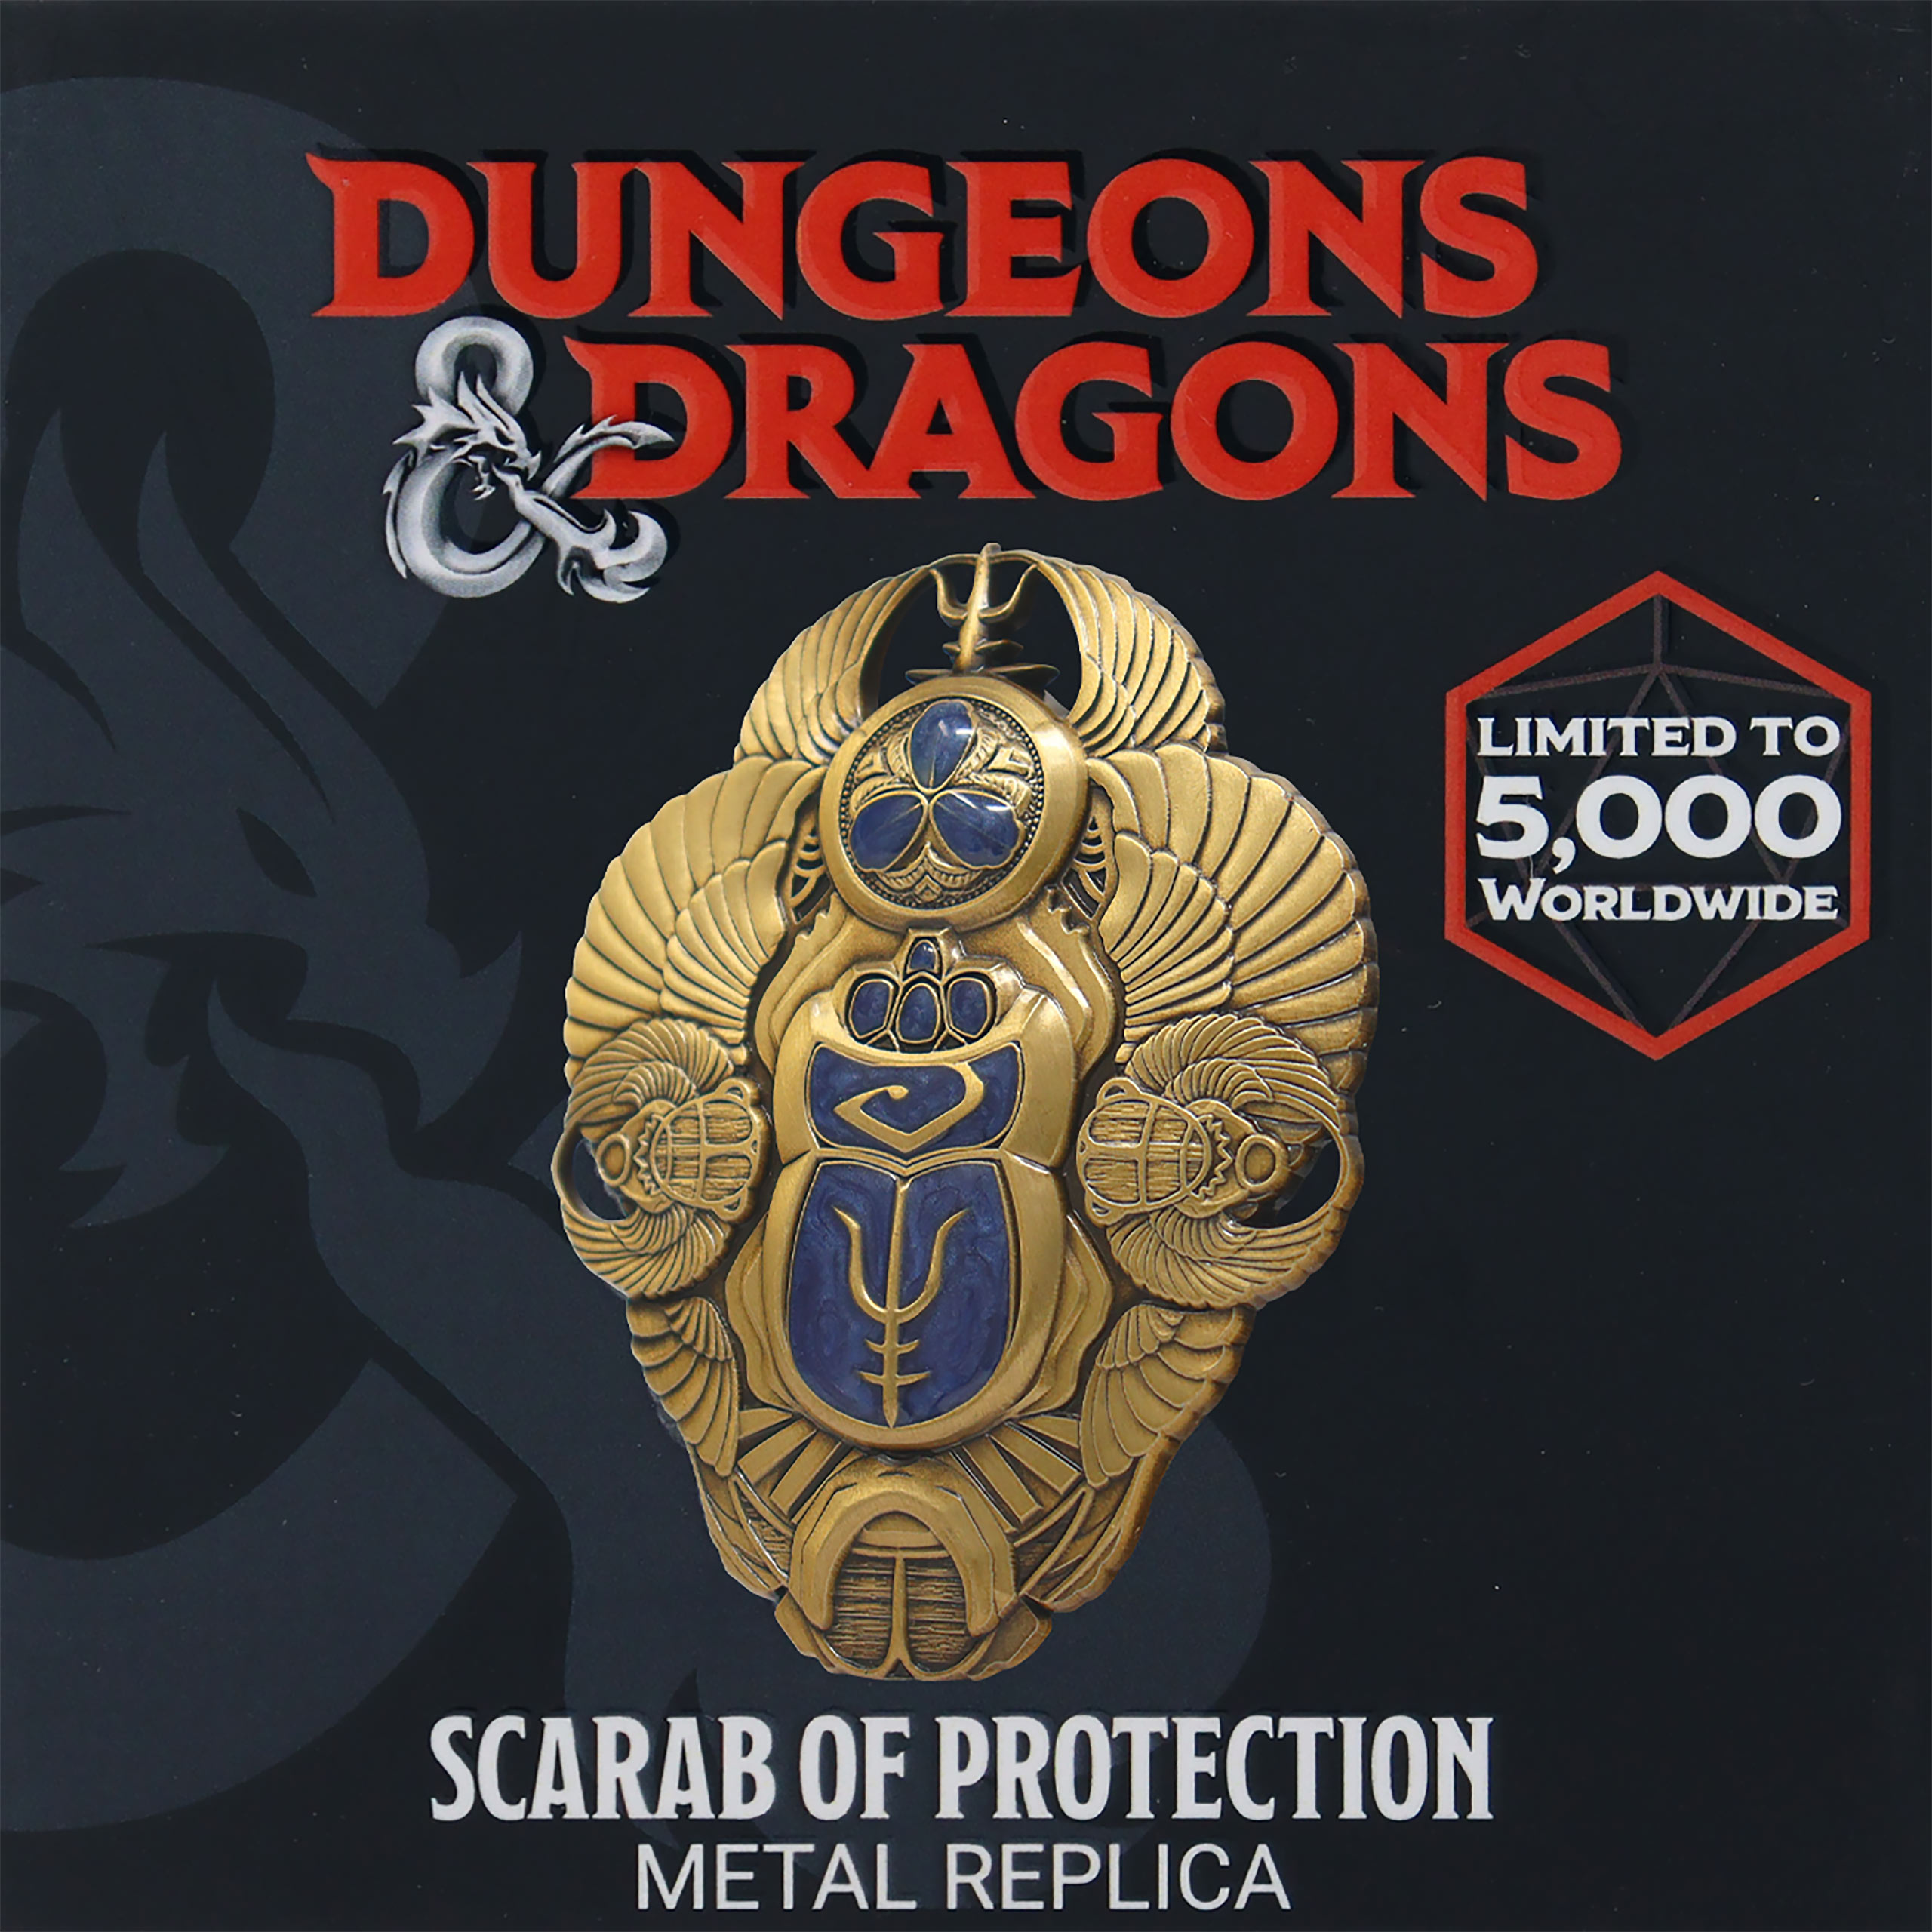 Dungeons & Dragons - Scarab Replica Limited